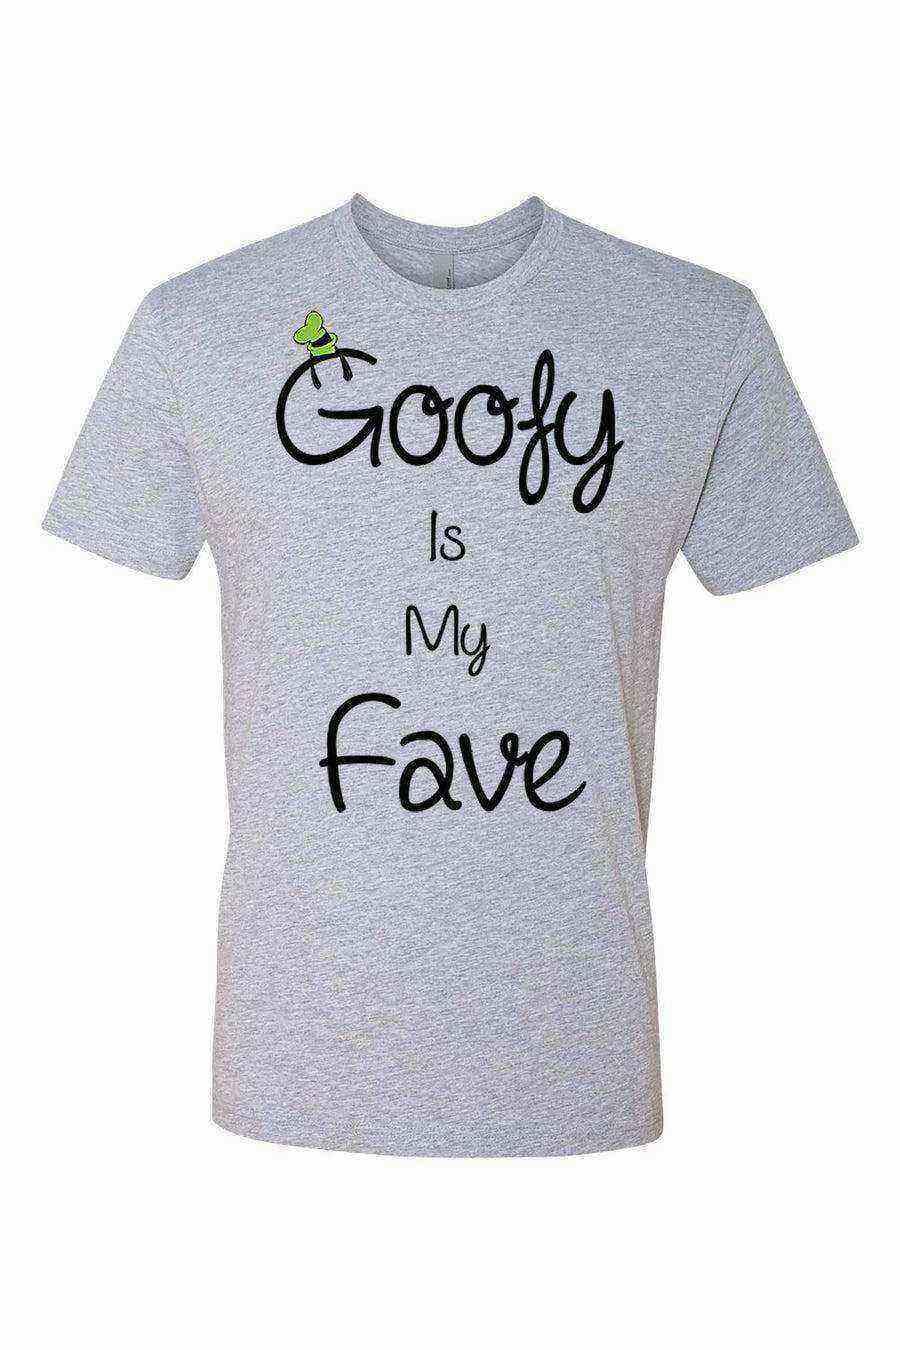 Youth | Goofy is my Fave Shirt - Dylan's Tees